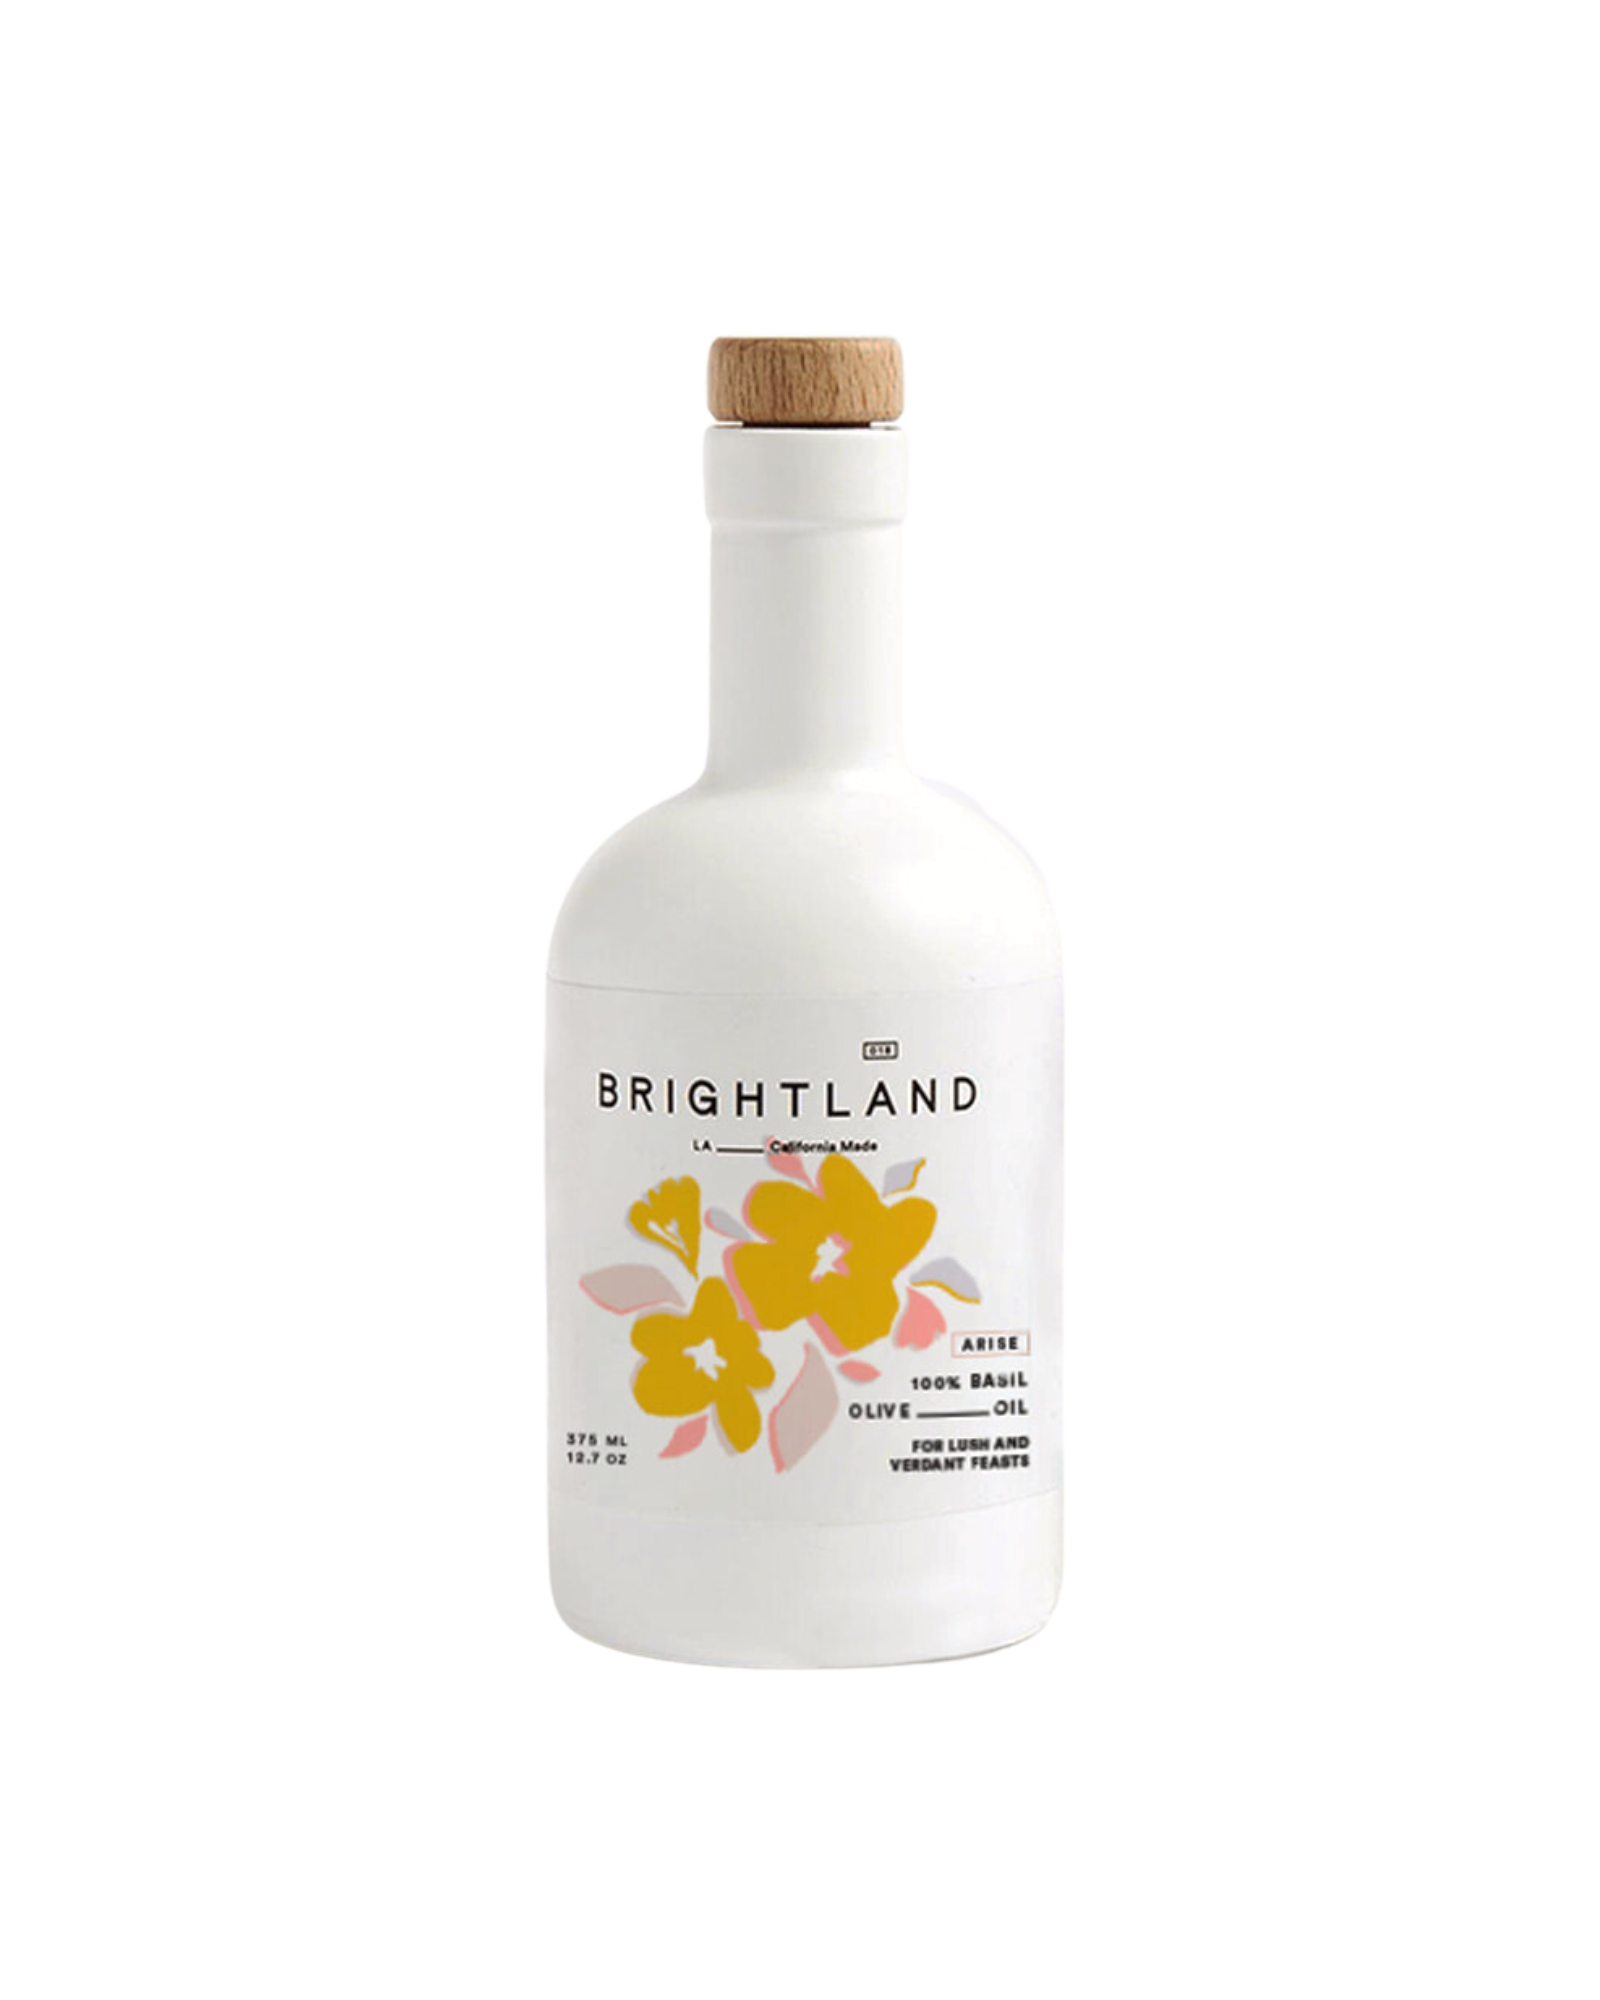 White olive oil bottle with yellow illustrated flowers on a white label